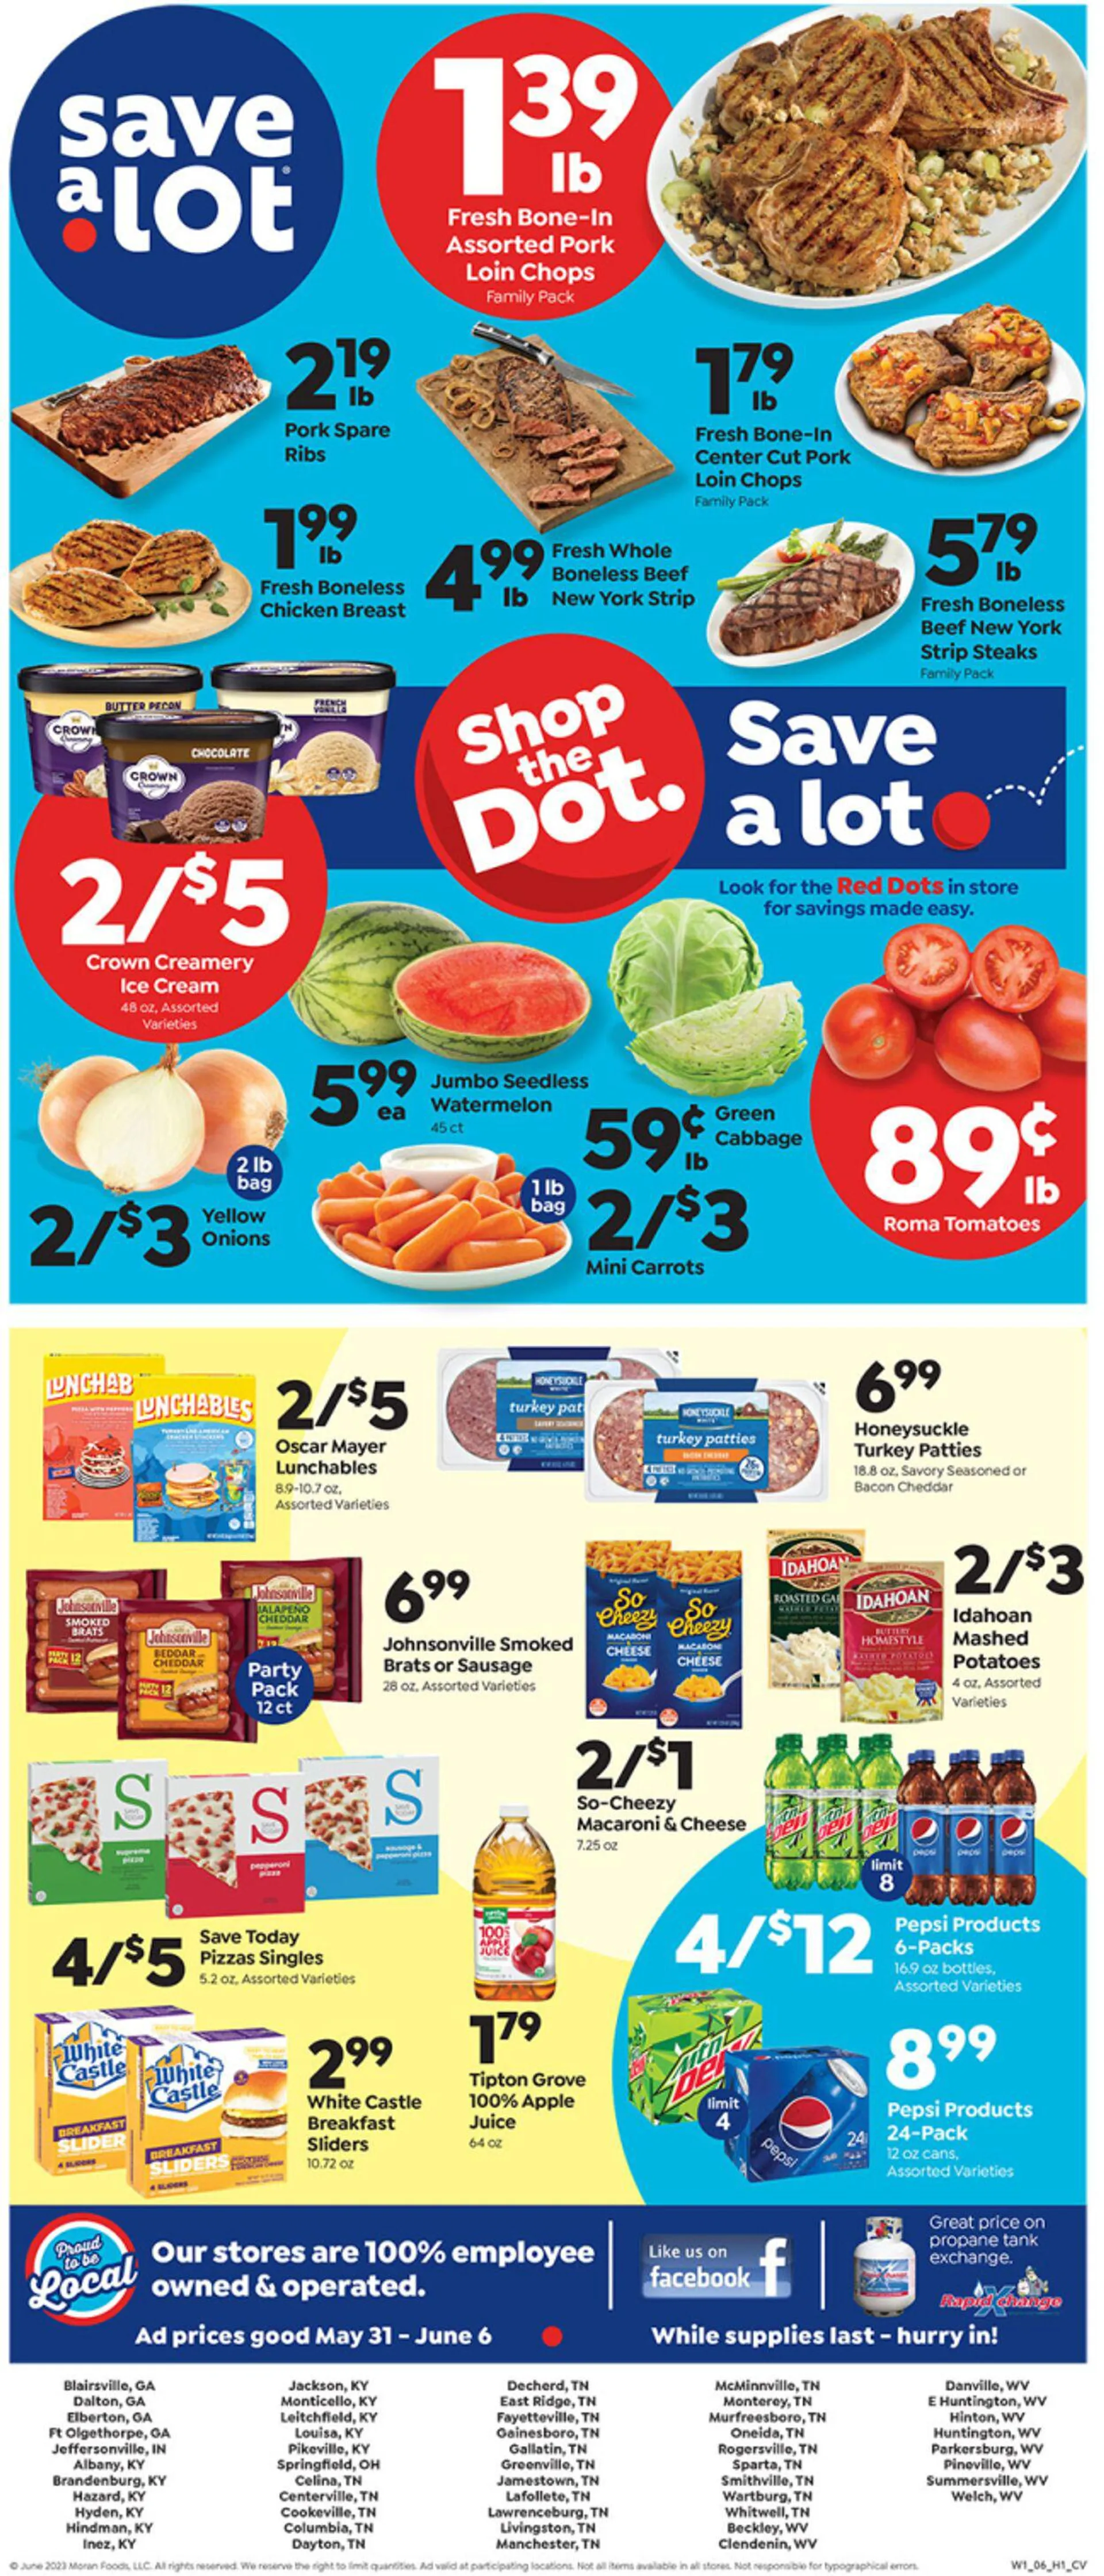 Save a Lot Current weekly ad - 1